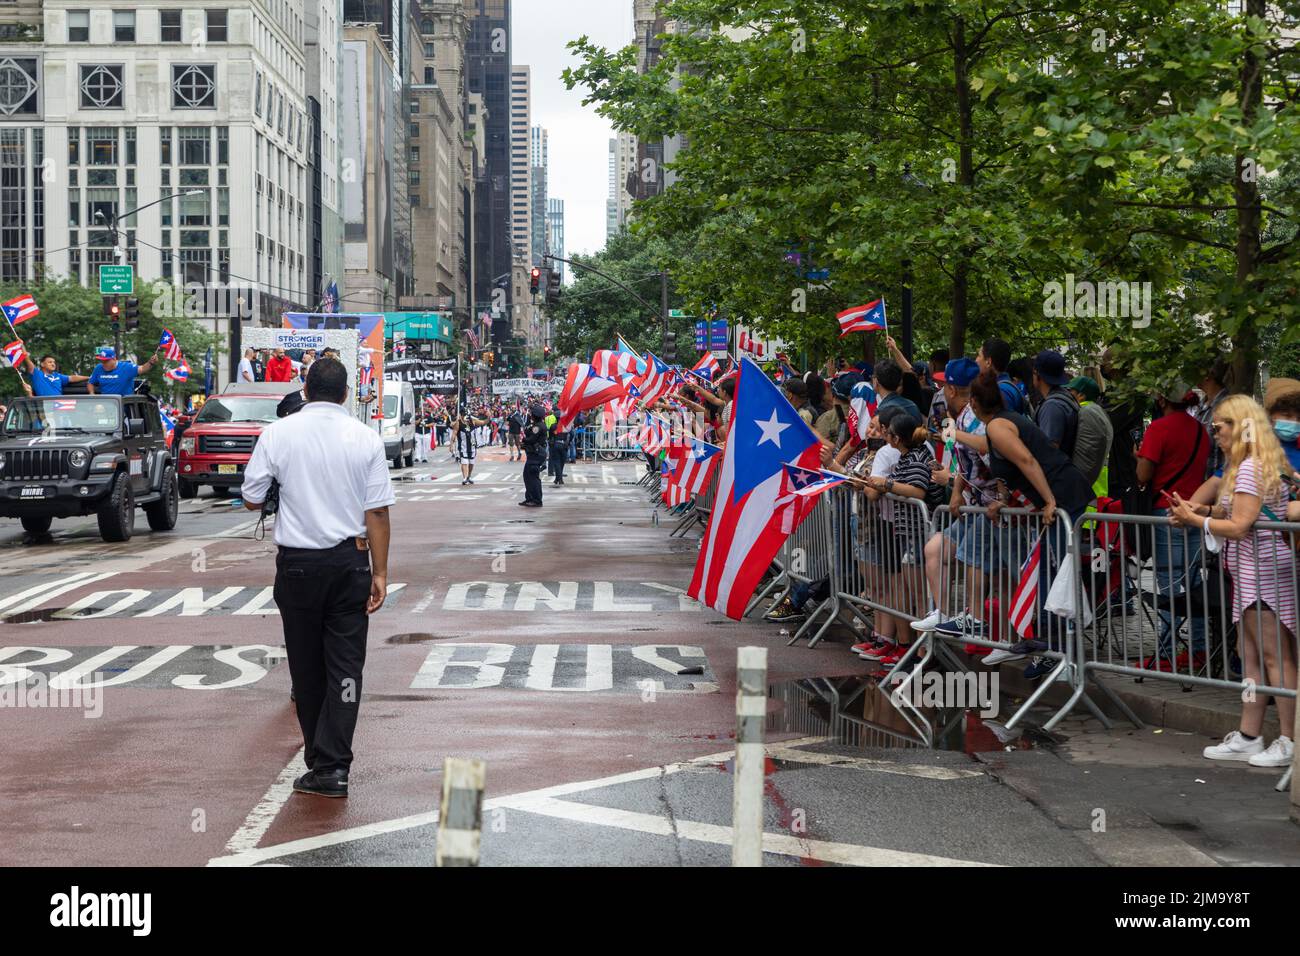 A group of people celebrating the Puerto Rican Day Parade in New York City, the USA Stock Photo